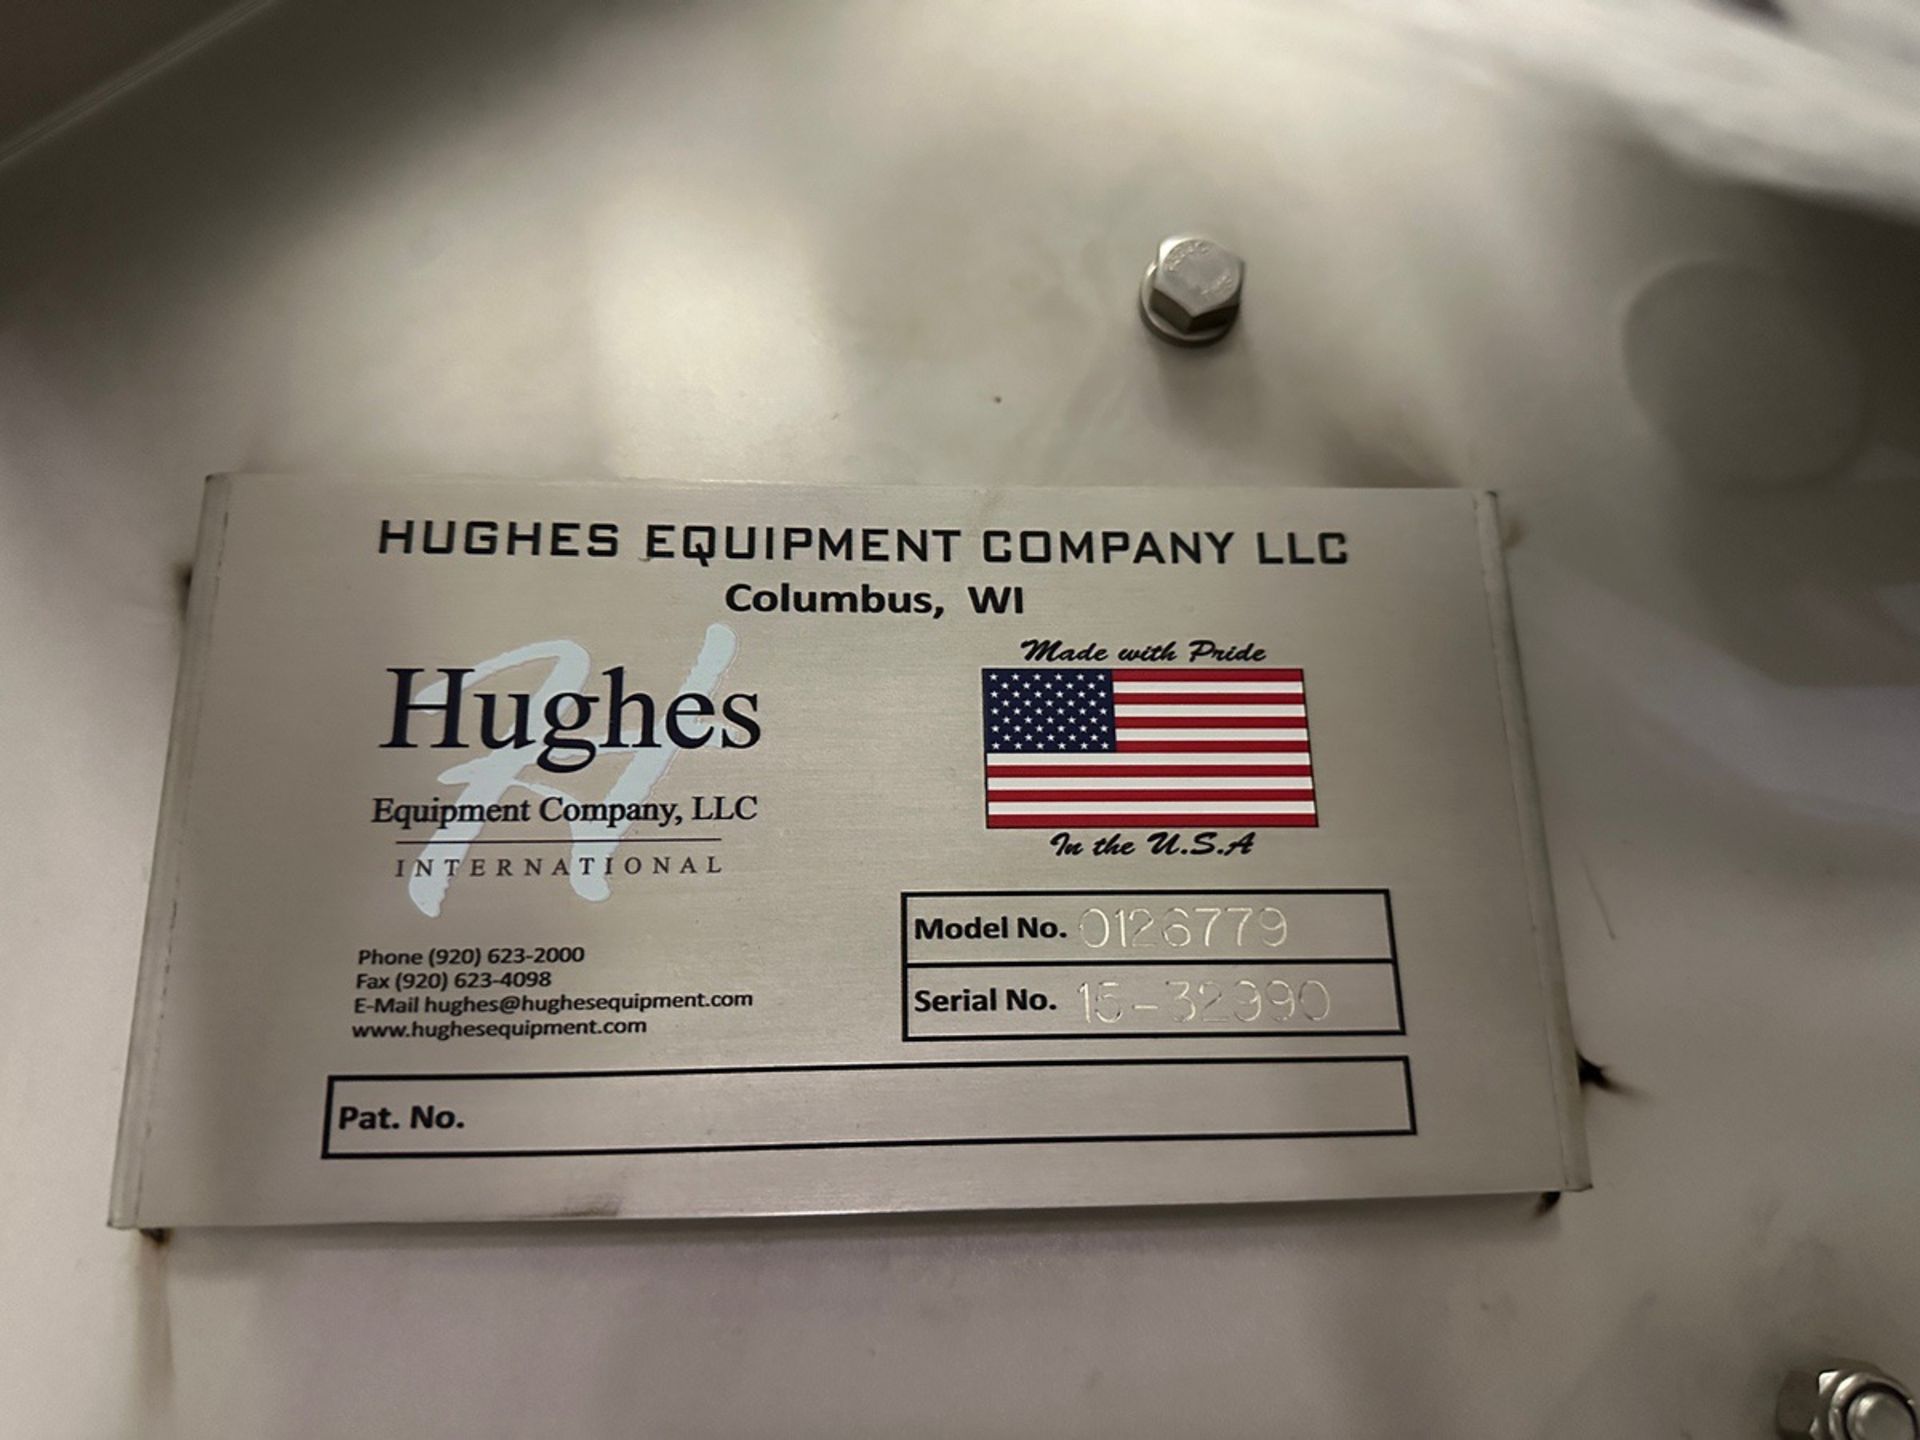 Hughes Incline Conveyor - Model 012 6779, S/N 15-32990 (Approx. 18" x 9') | Rig See Desc - Image 3 of 3